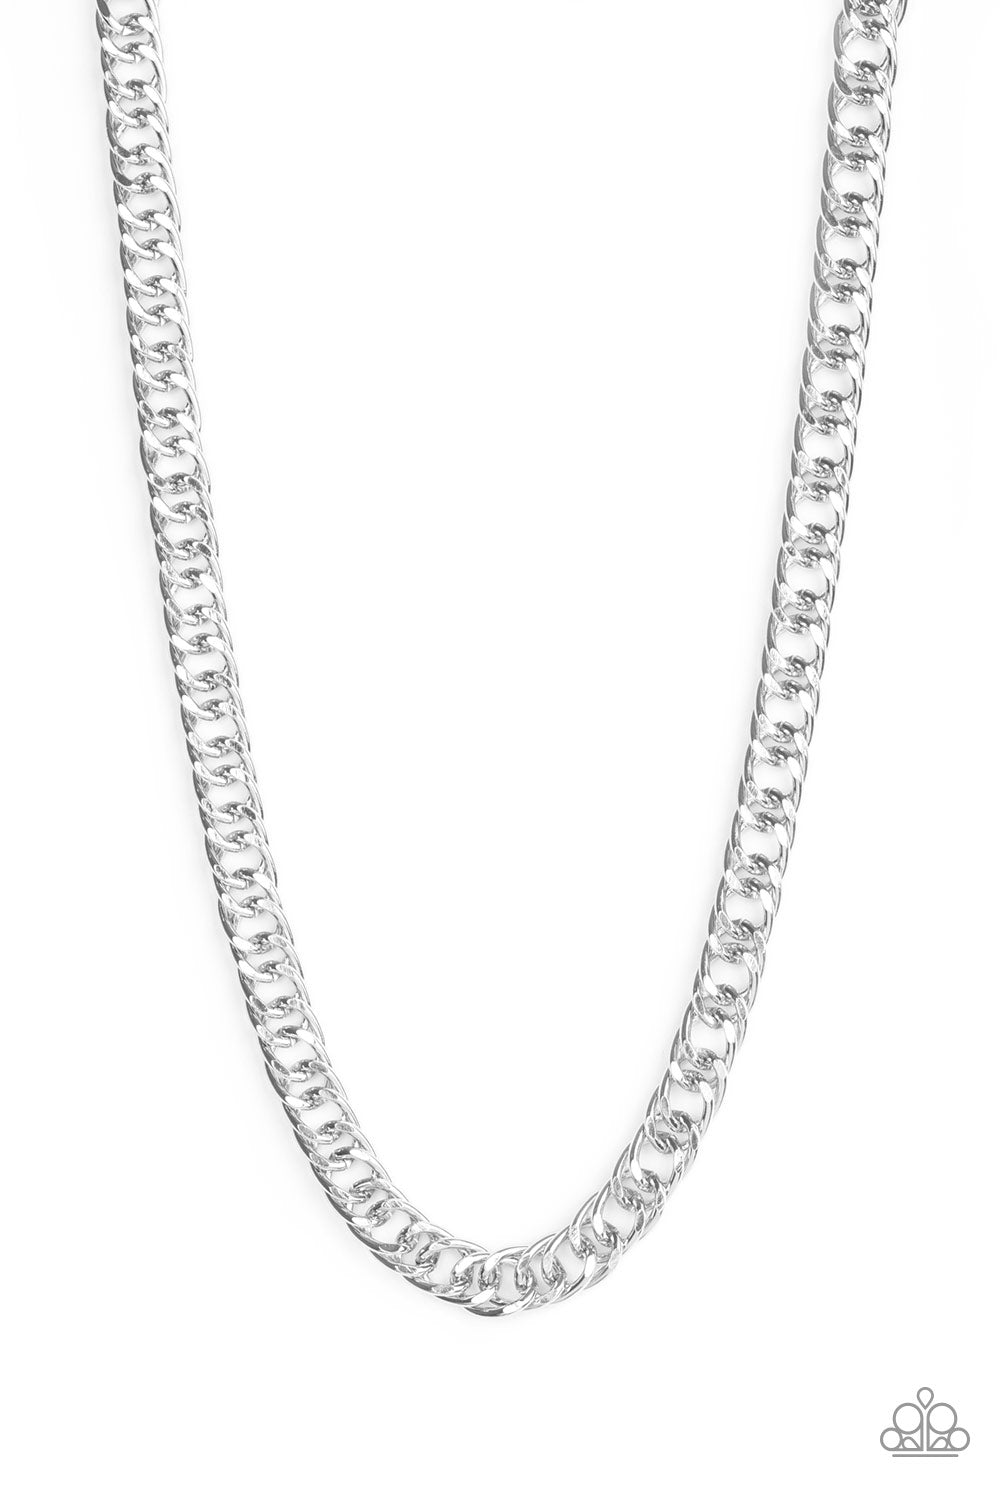 pittmanbling-and-jewelry-inc-presentsomega-silver-mens necklace-paparazzi-accessories